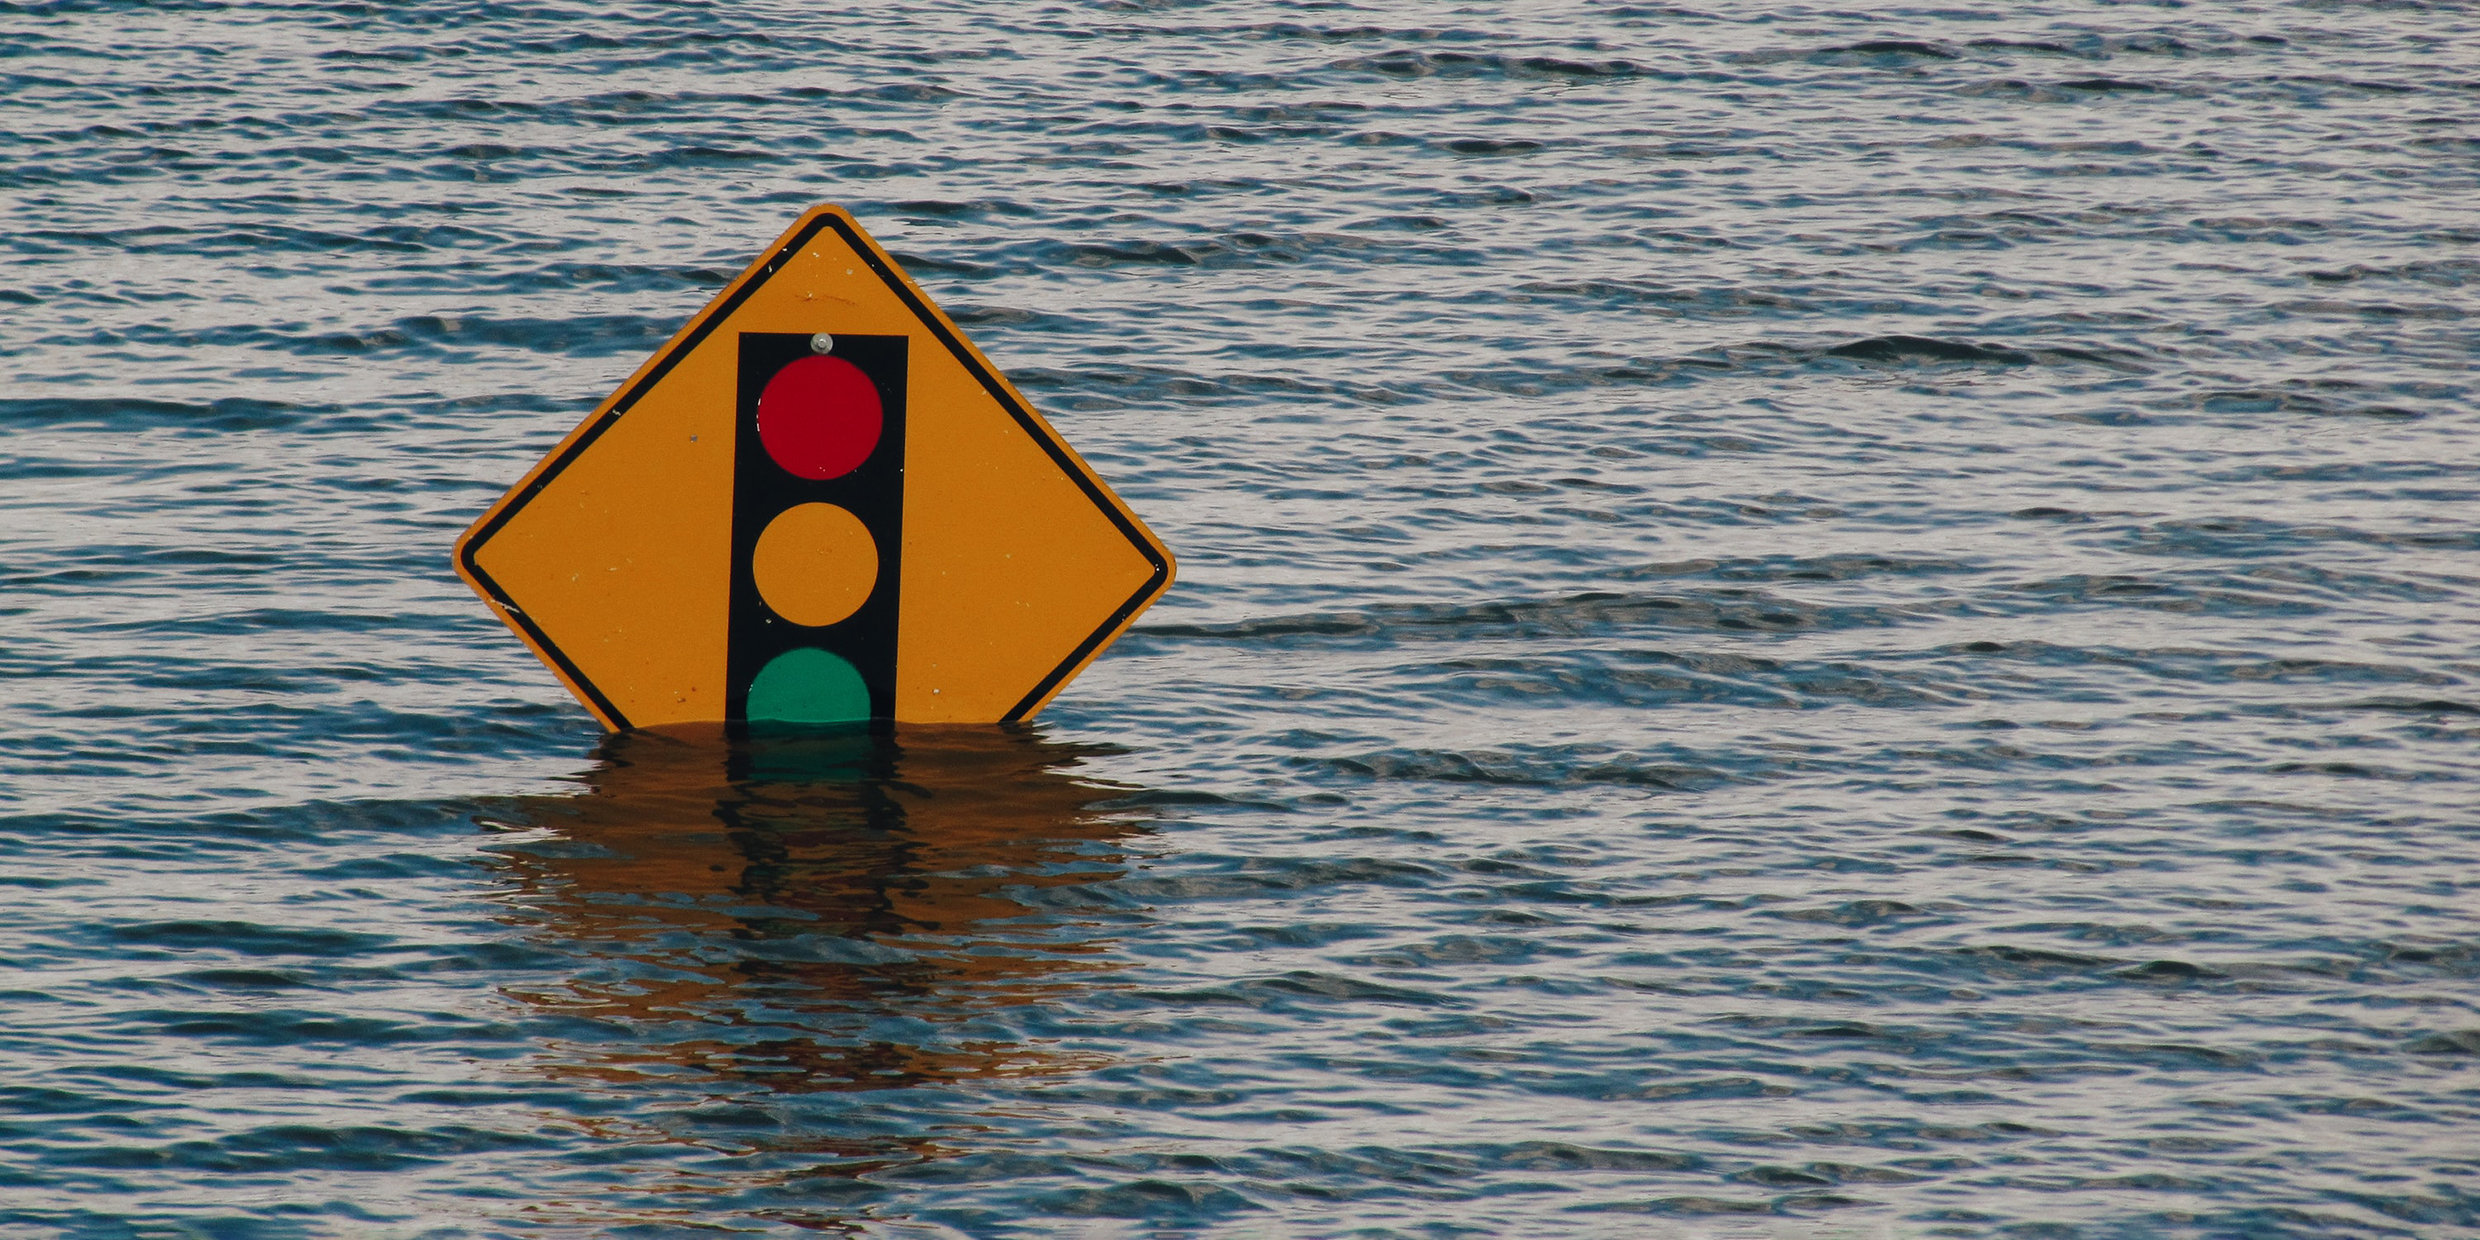 Image of a traffic sign partially submerged in floodwater